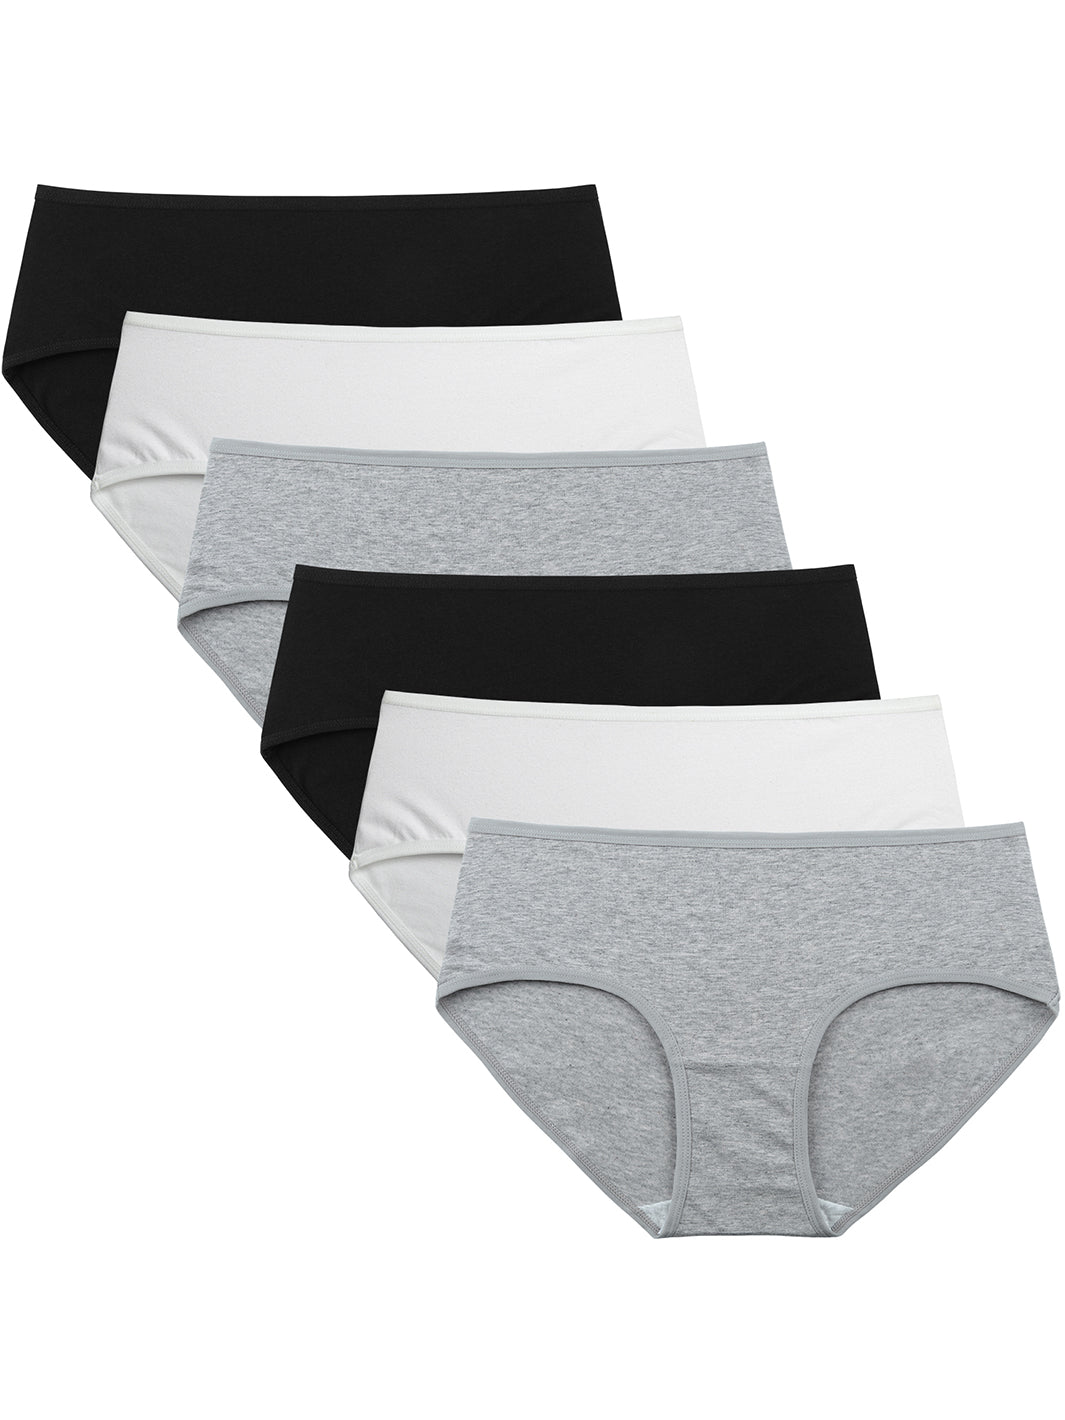 6 Packs of MAMIA Women's Ladies No Show Cotton Underwear Hipster Panties -  Style#17 